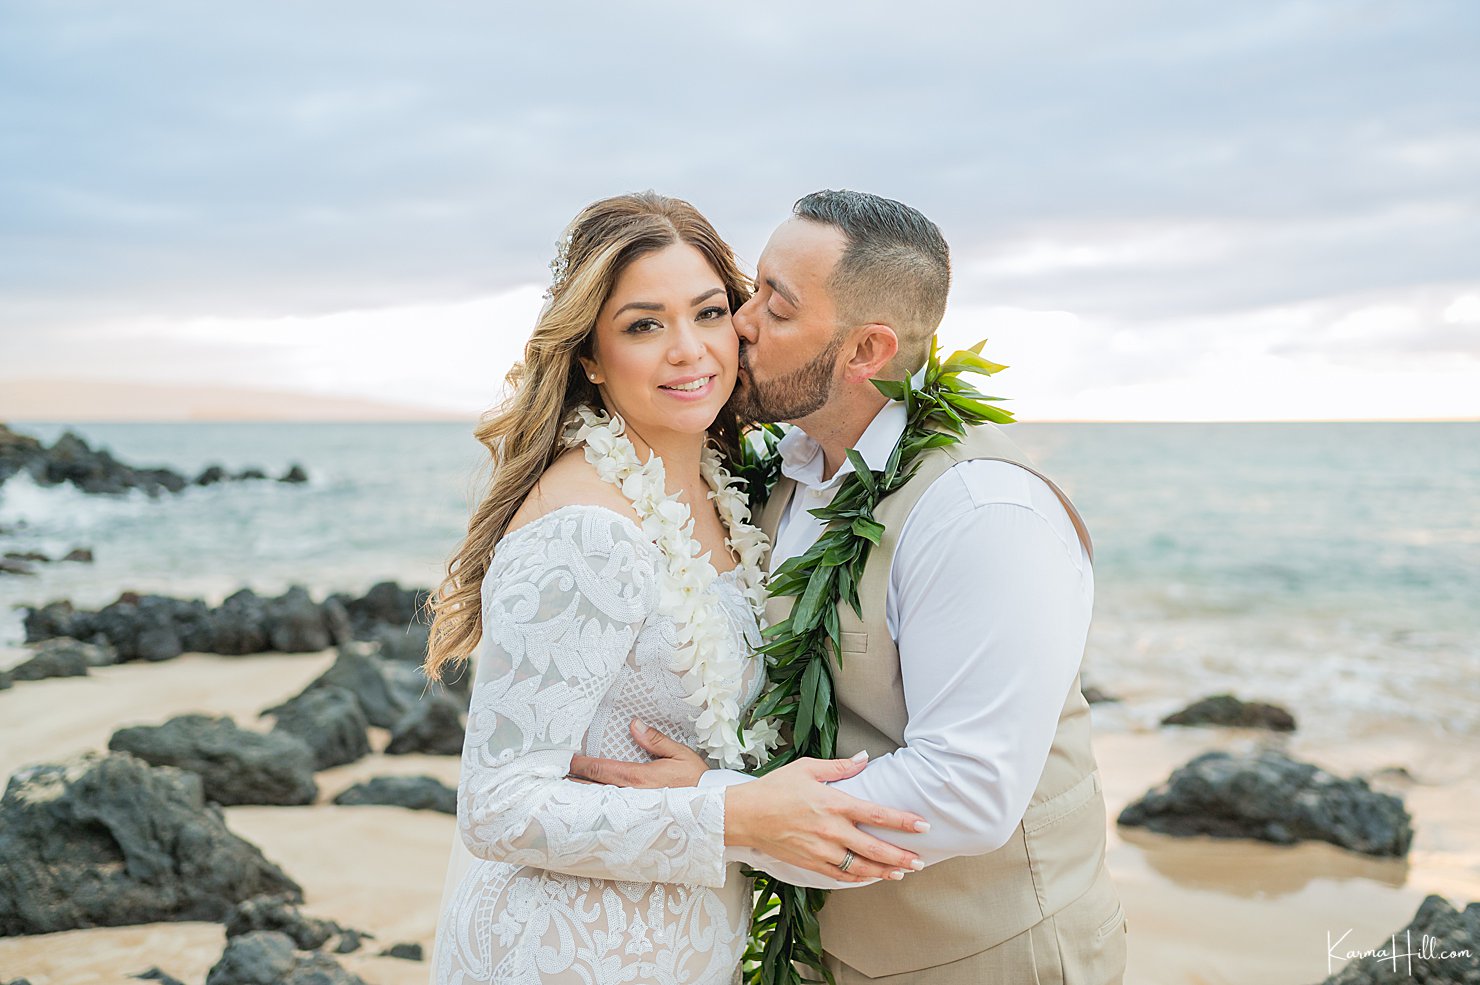 Photography and coordination for Vow Renewal in Maui